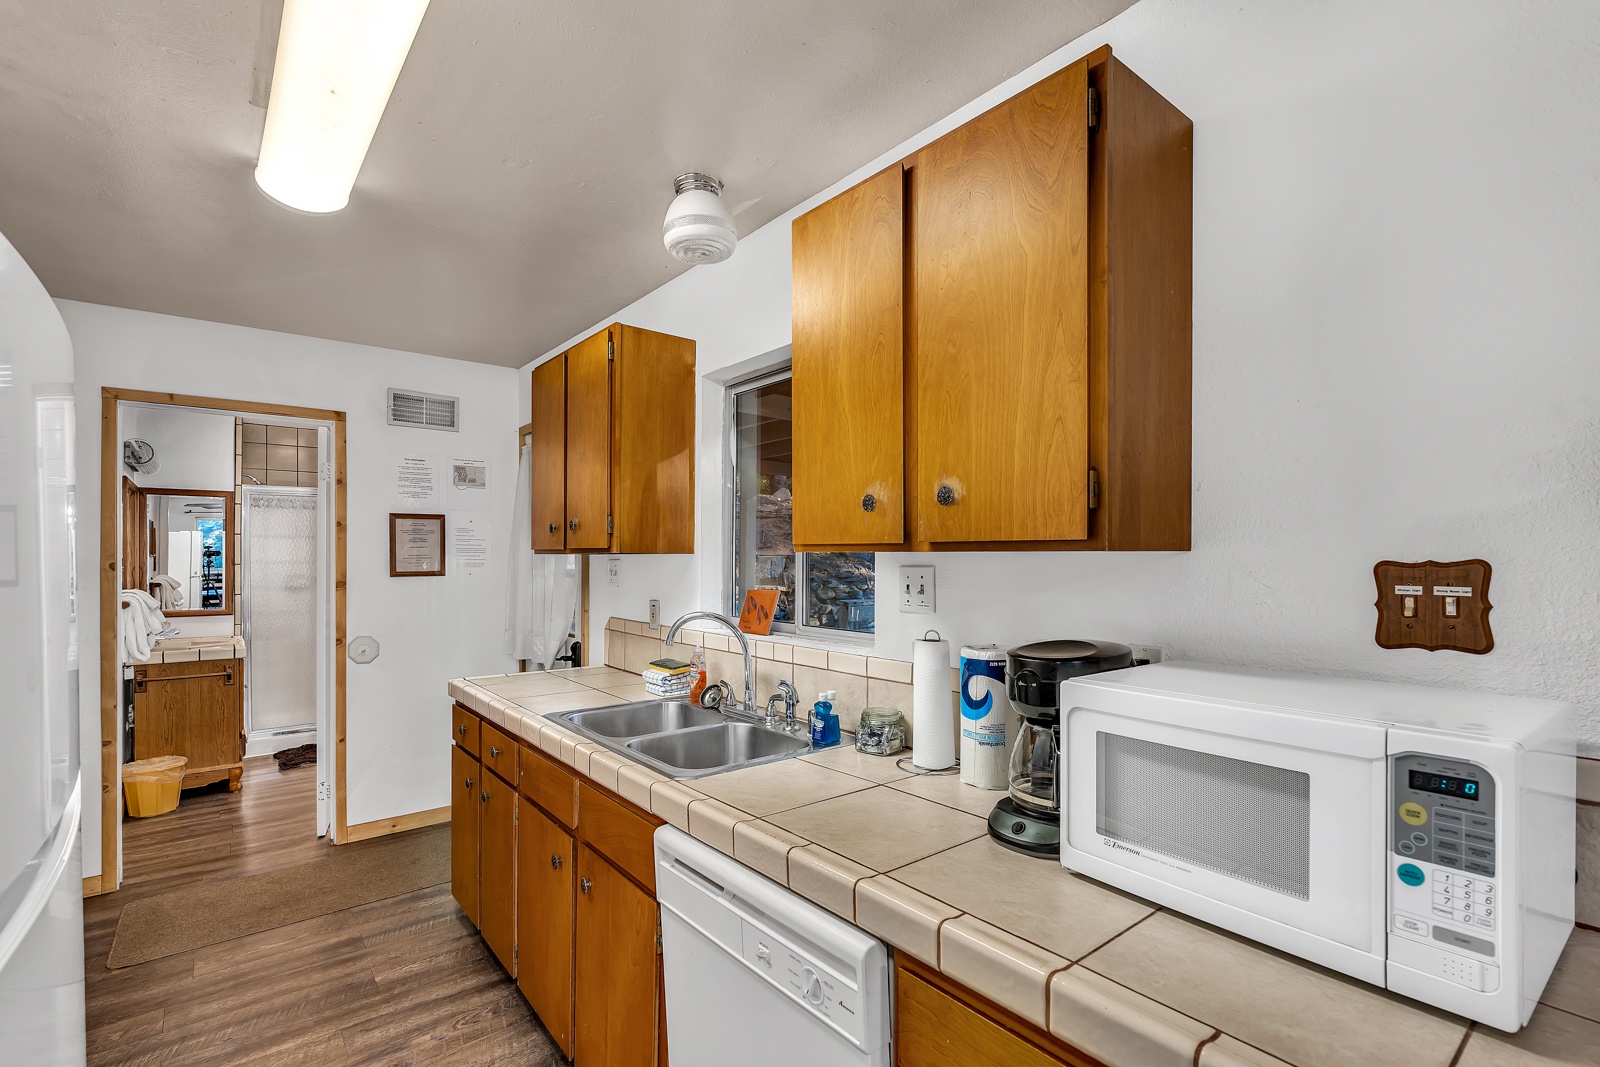 The kitchen offers ample storage space & all the comforts of home